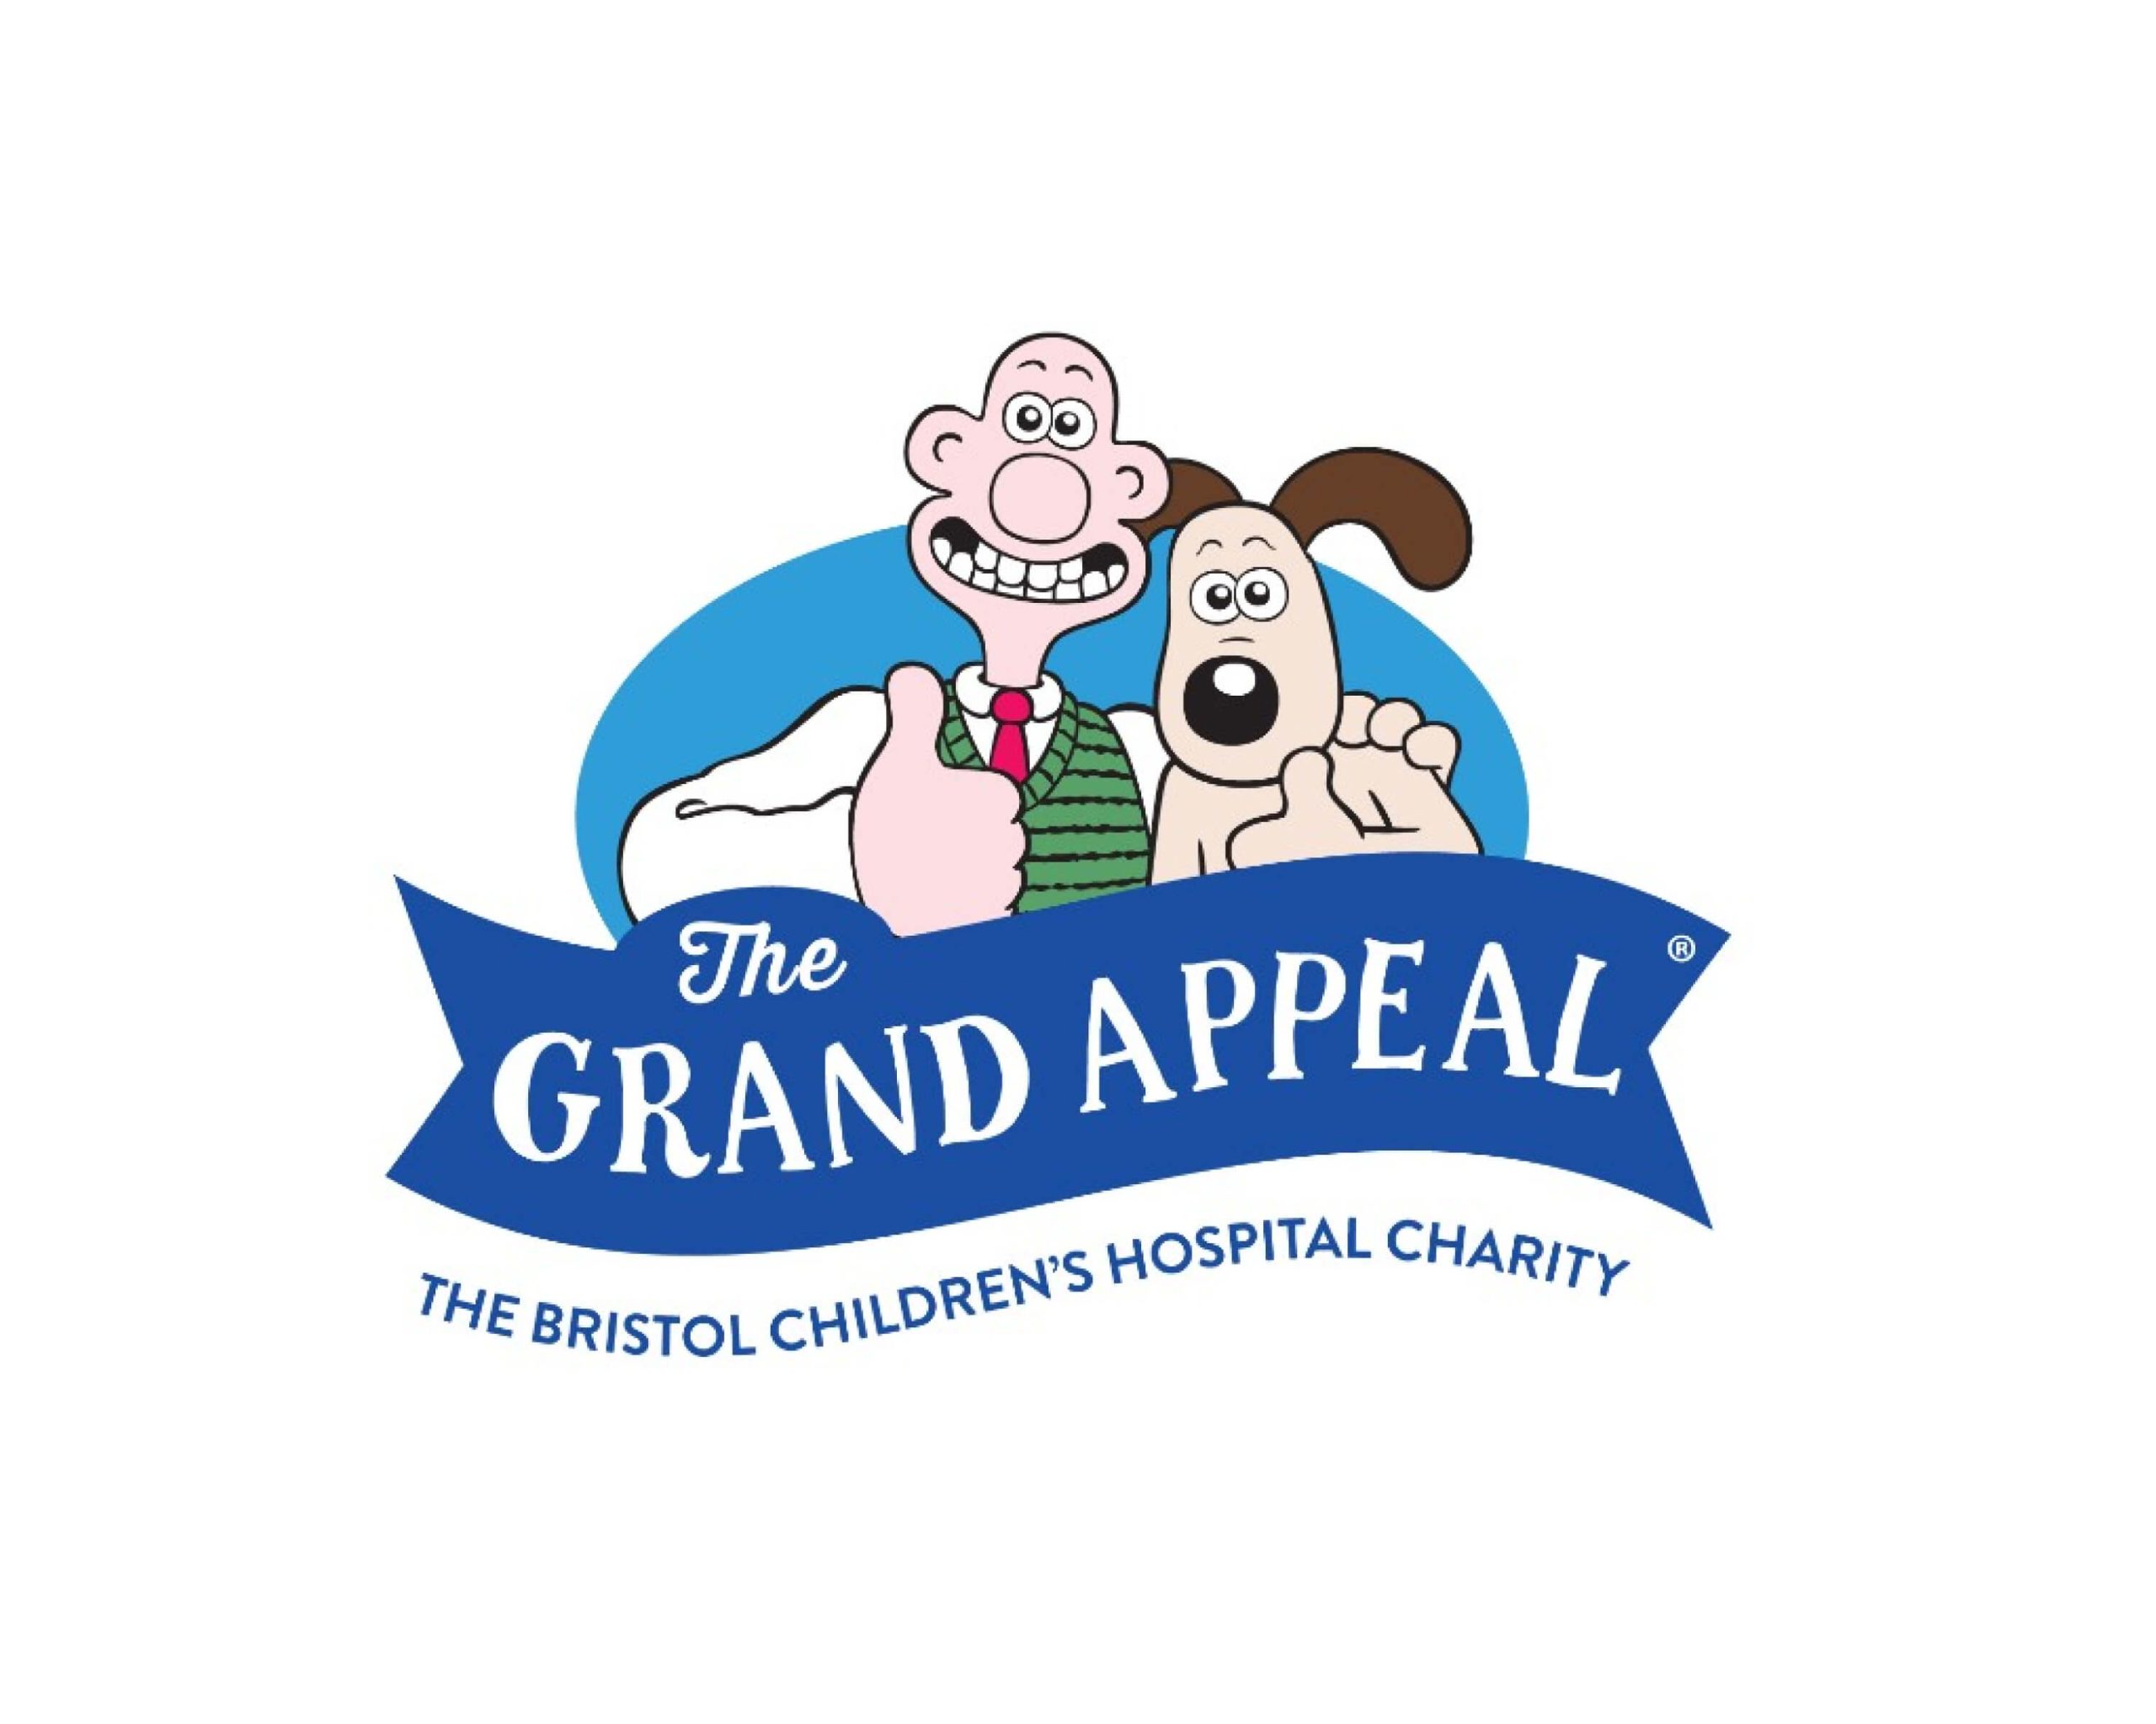 The Grand Appeal - The Bristol Children's Hospital Charity